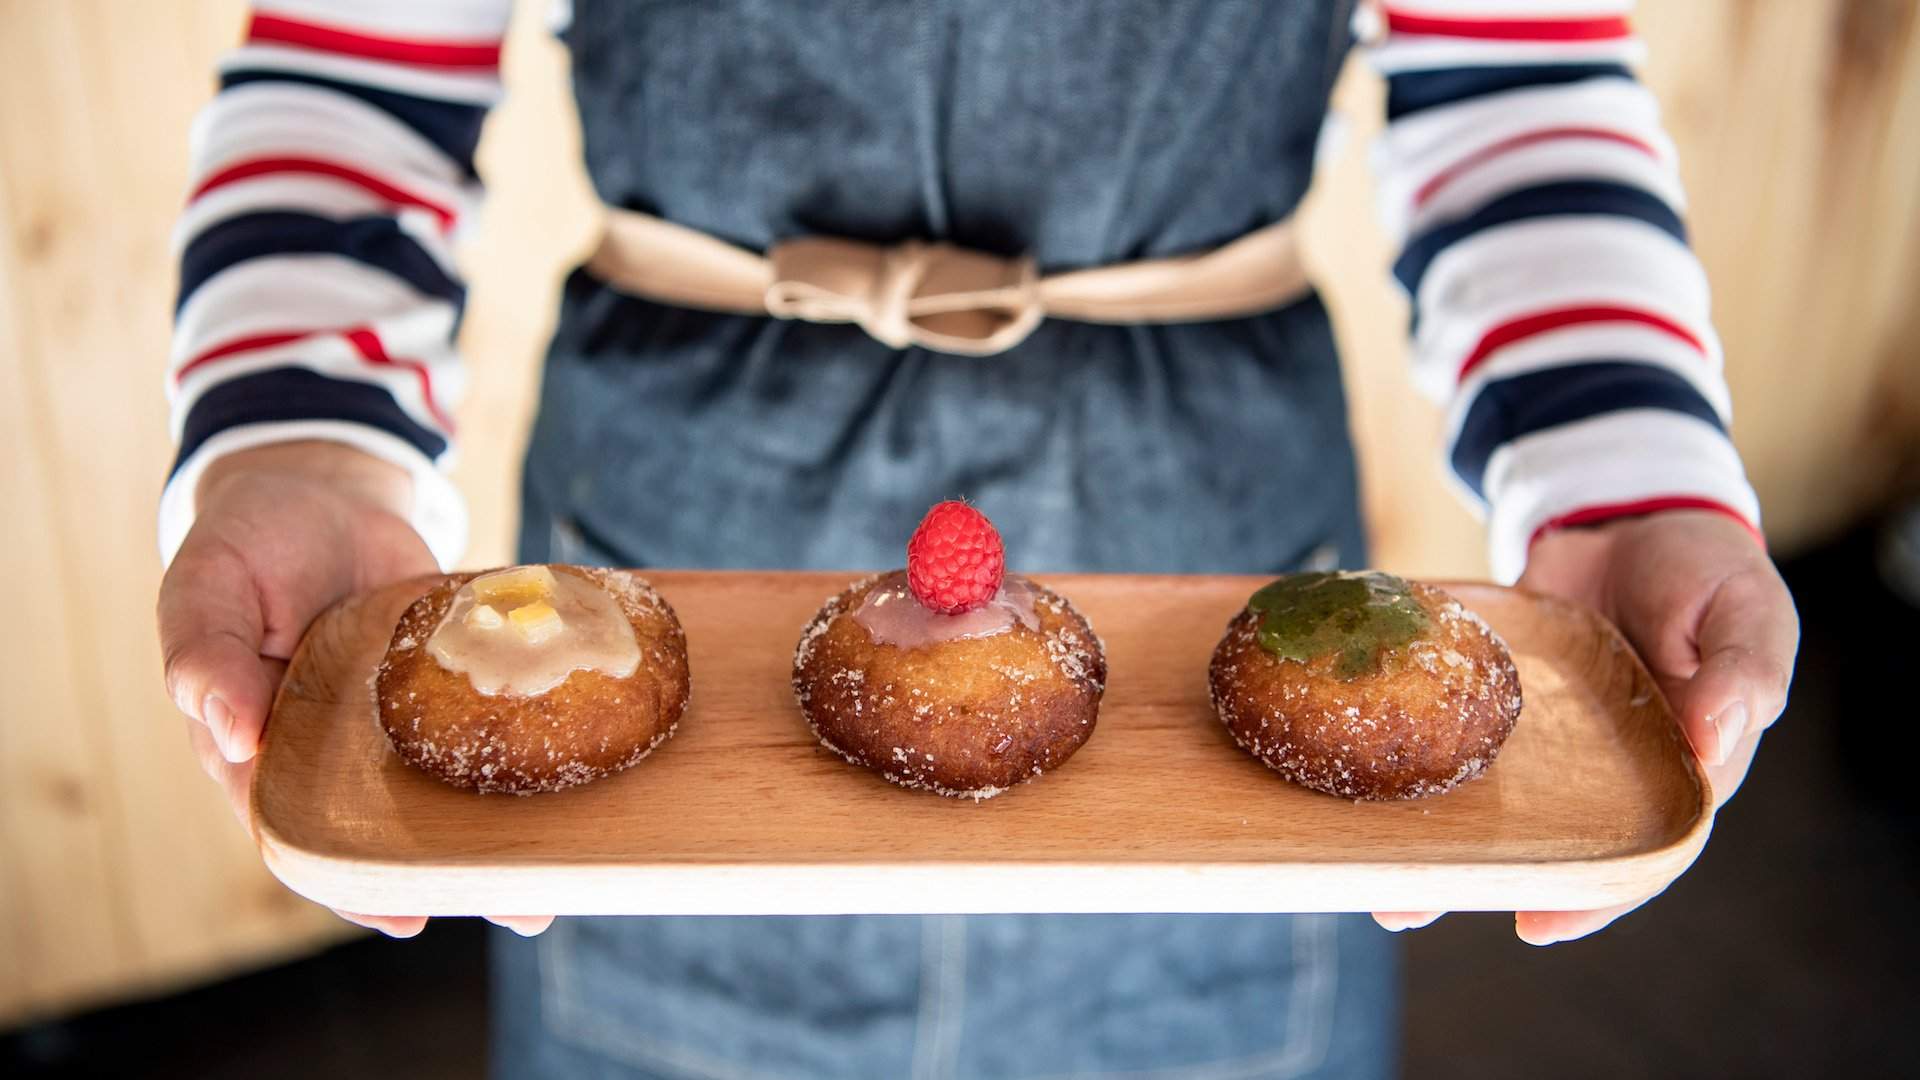 vegan doughnuts on a wooden board - Comeco in Sydney's Newtown